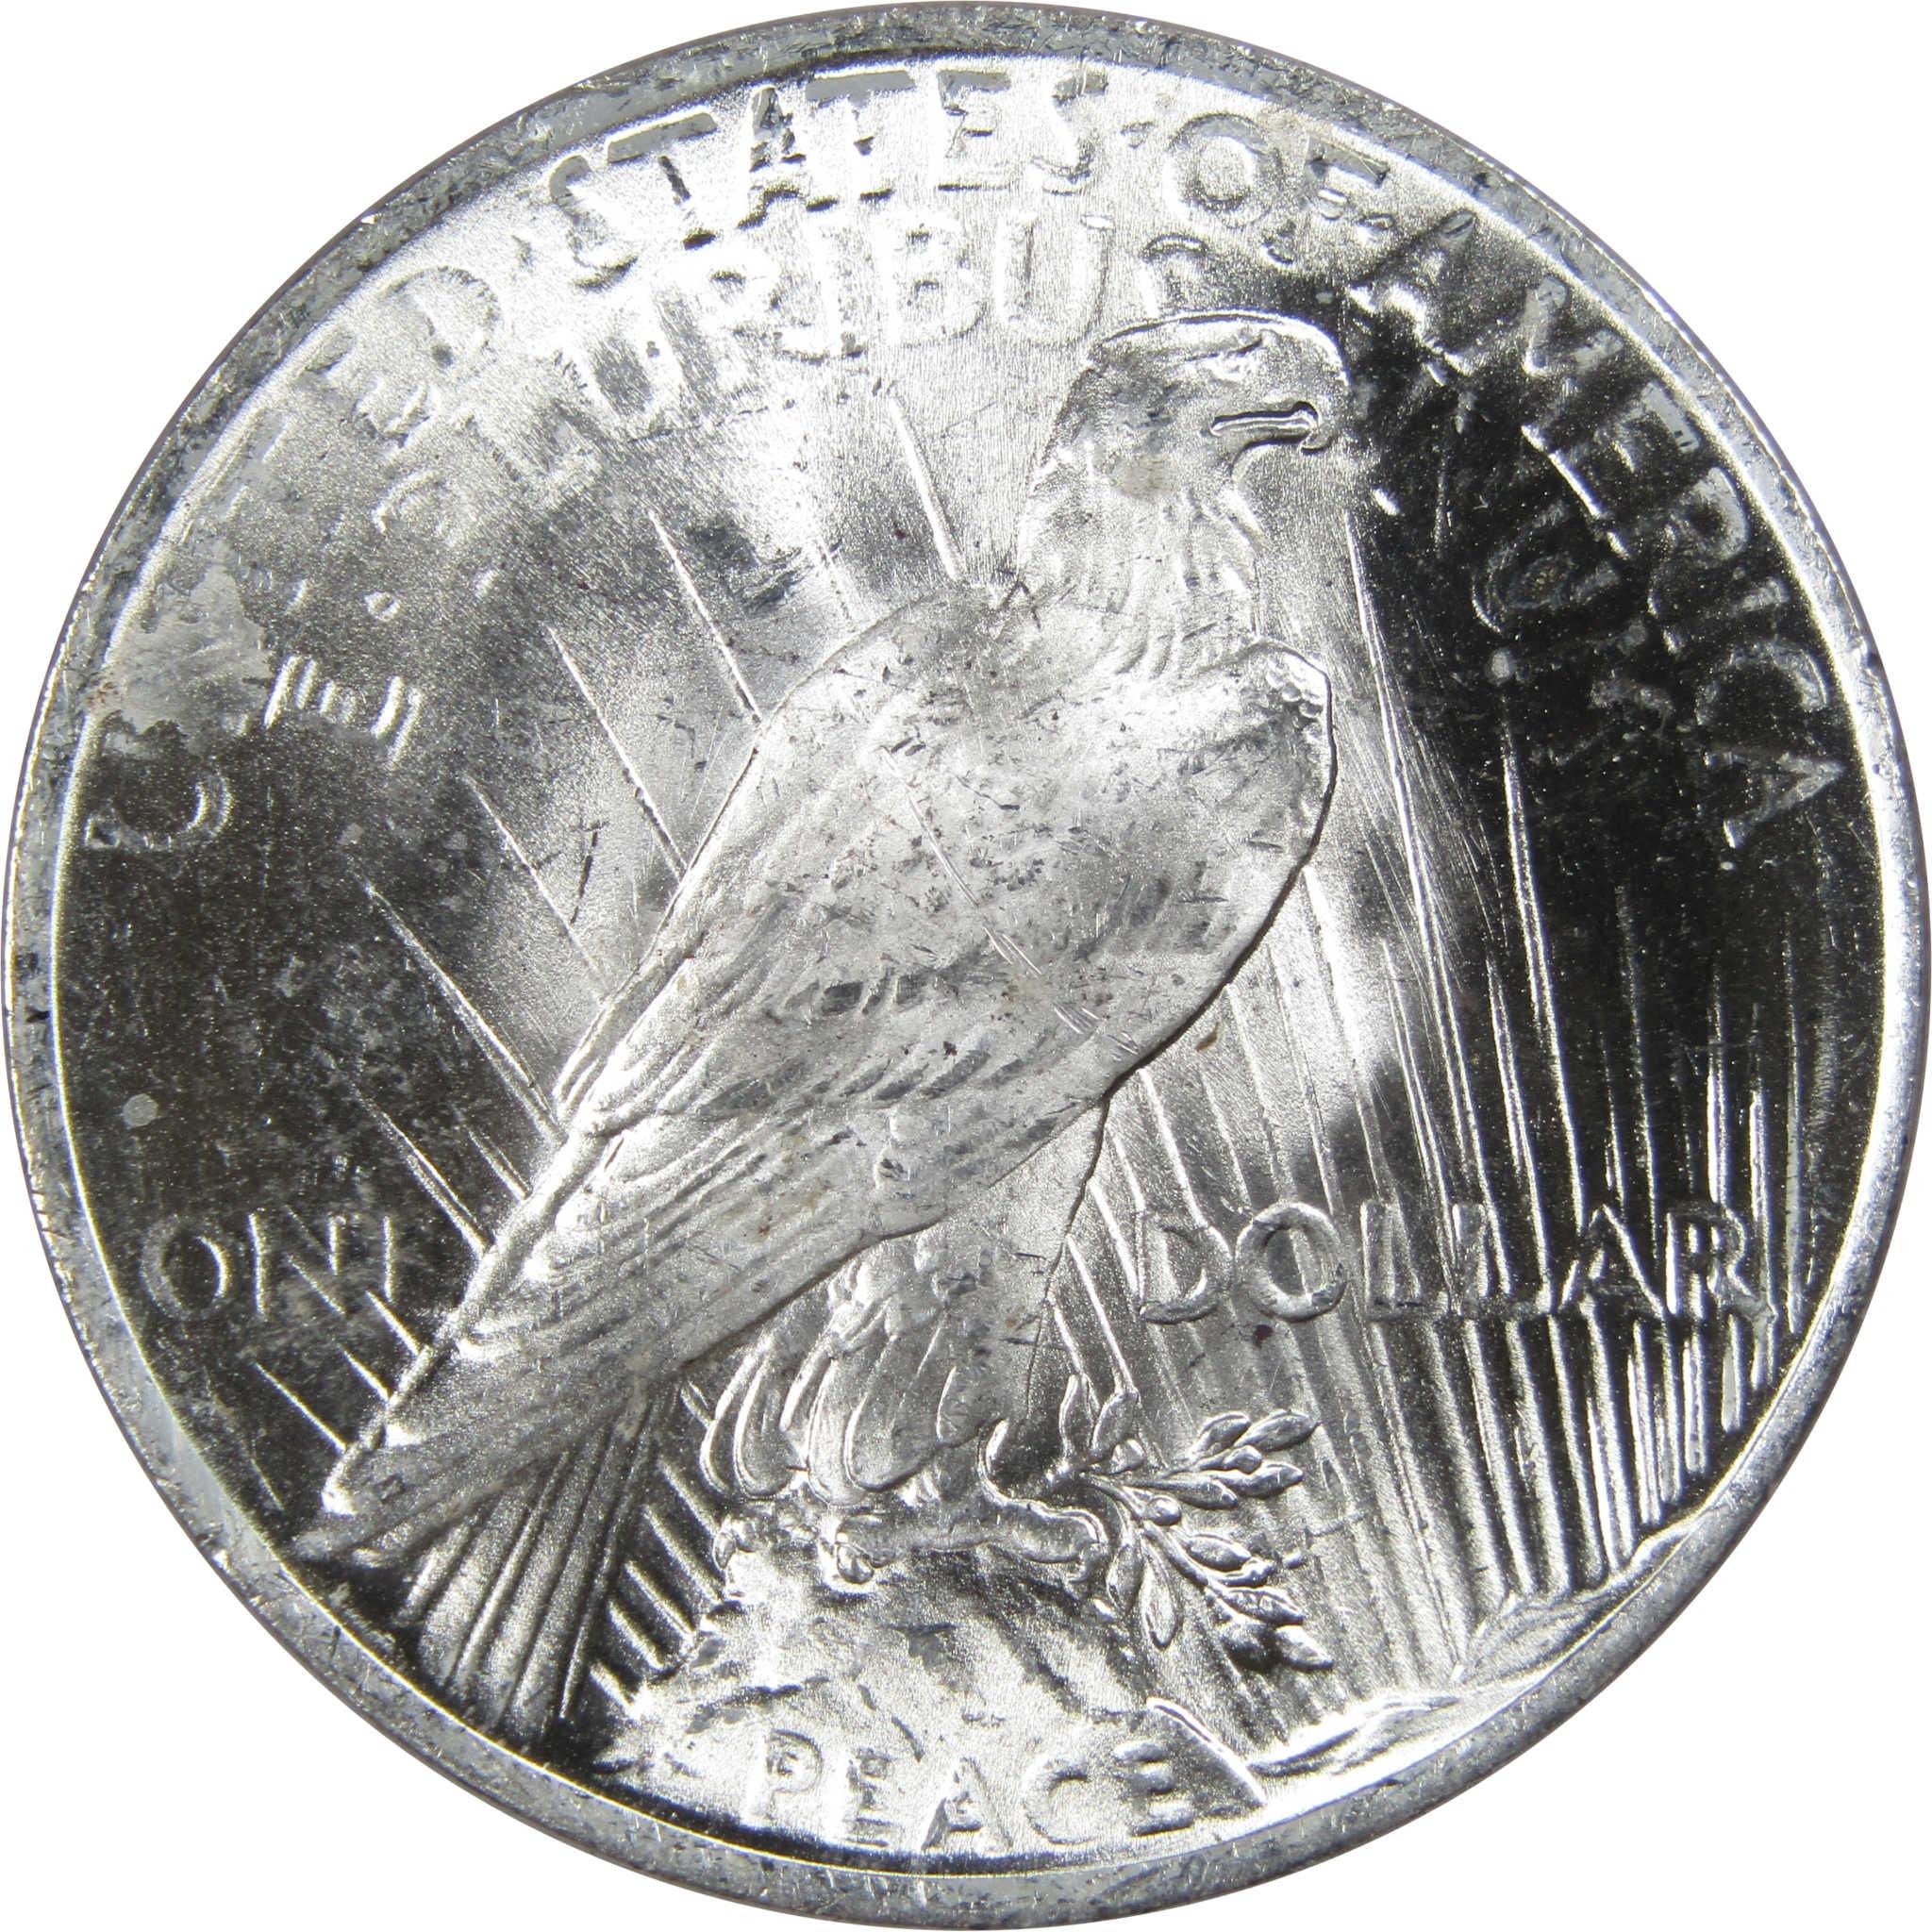 1923 Peace Dollar BU Choice Uncirculated Mint State 90% Silver $1 US Coin